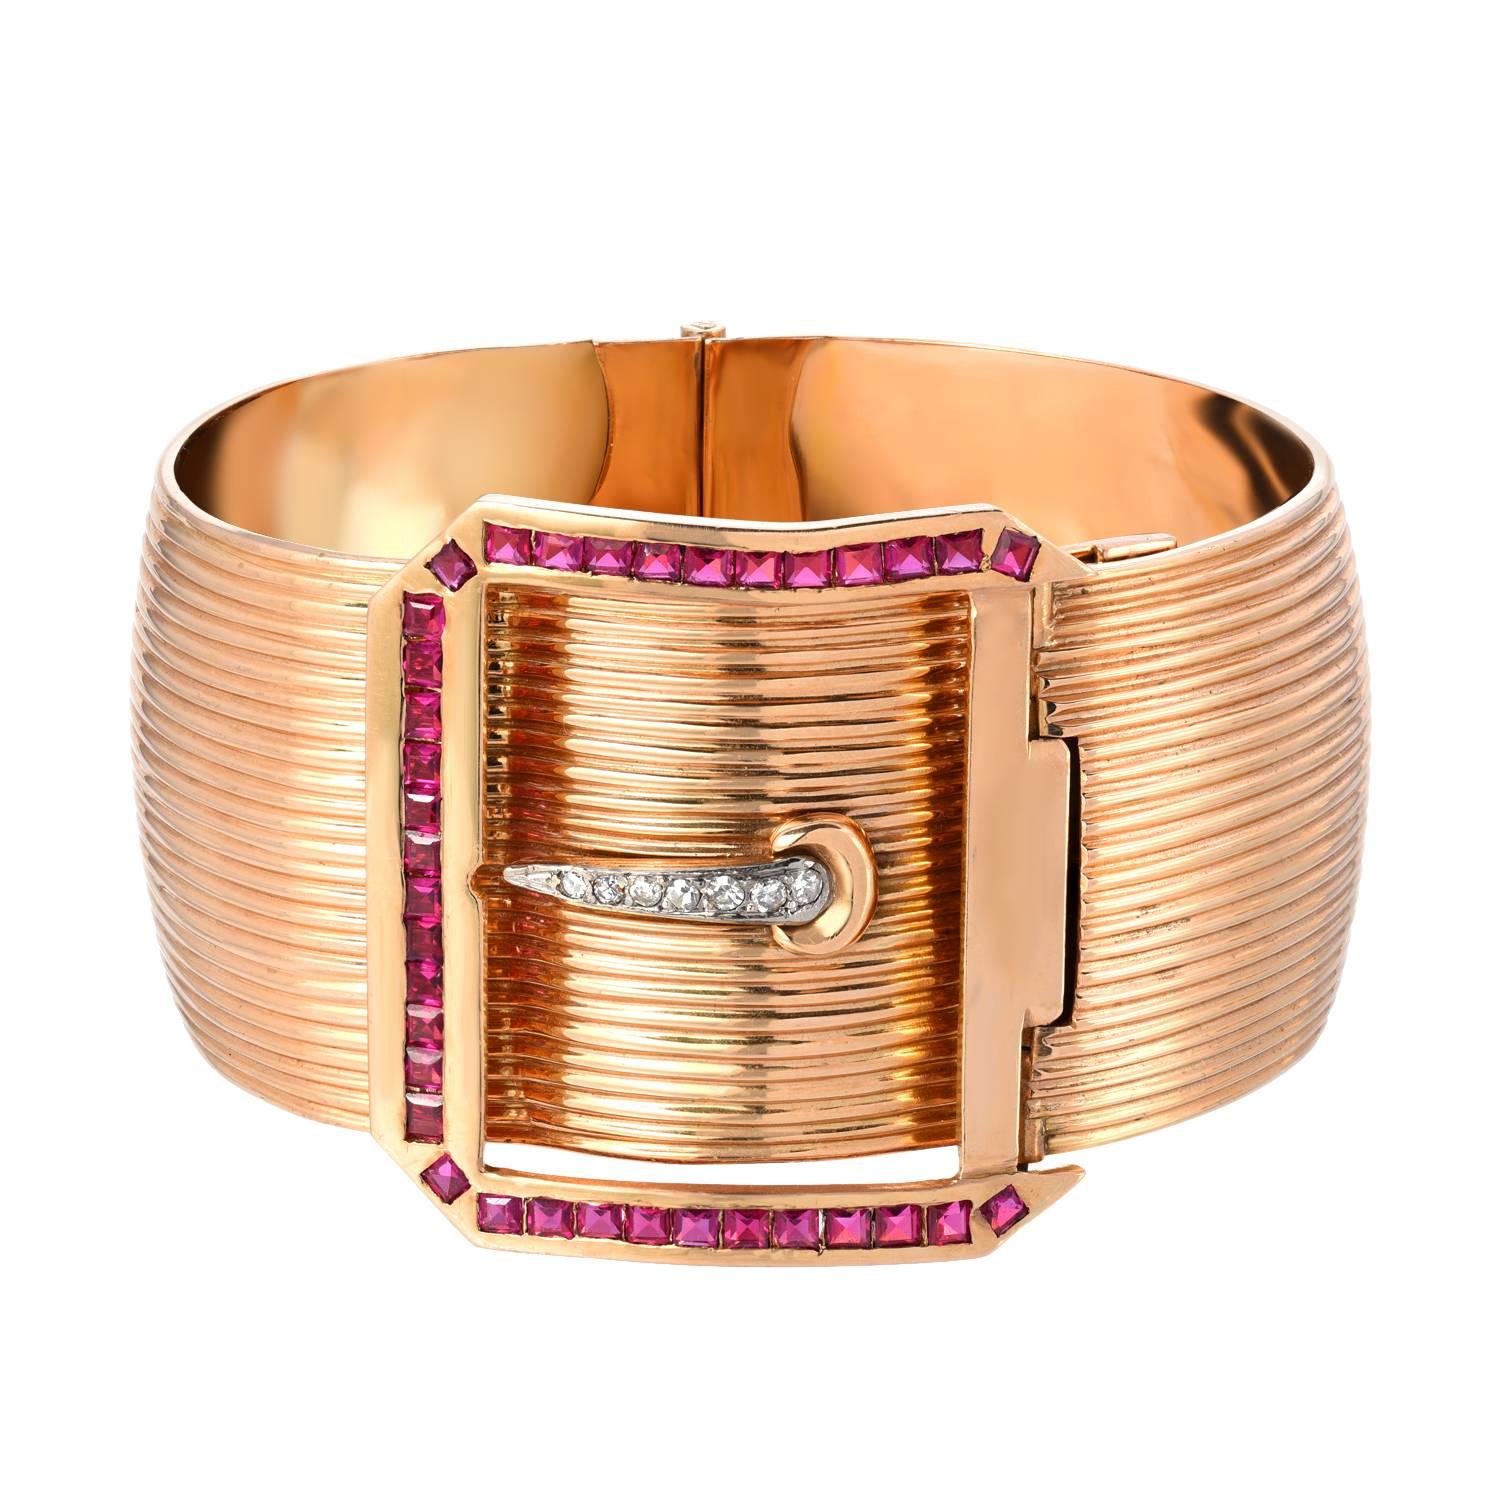  Retro Diamonds and Rubies Buckle  18K Pink Gold  Bangle   For Sale